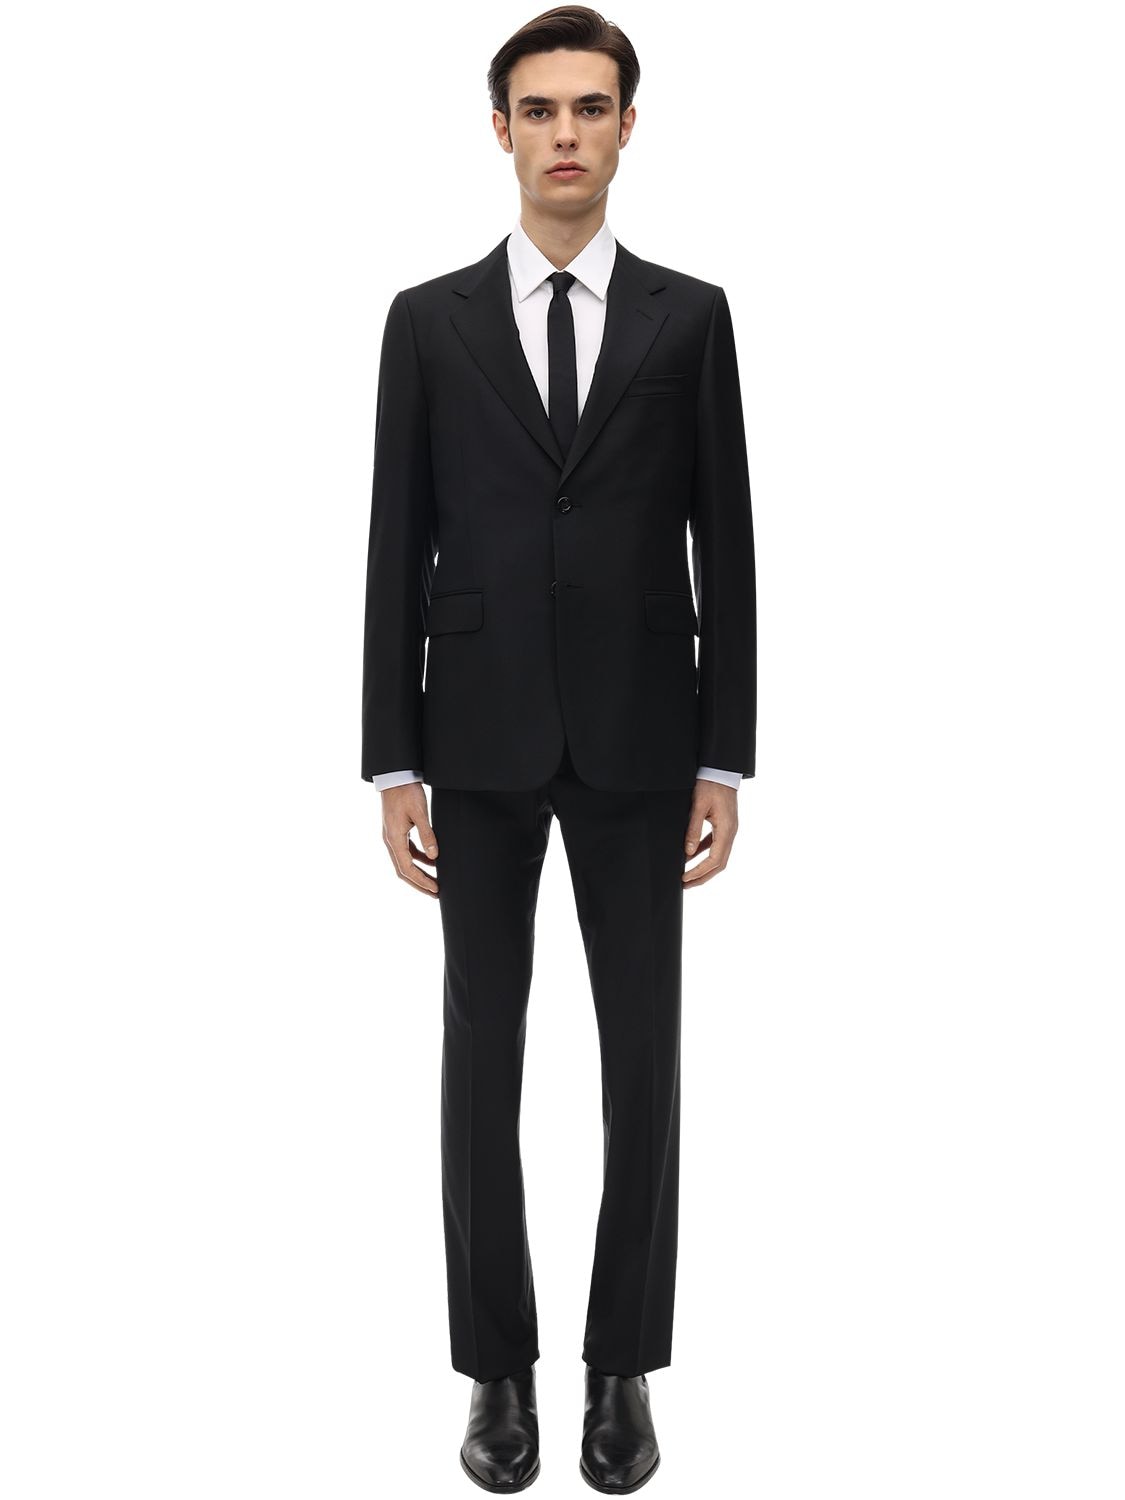 GUCCI NATURAL WOOL BLEND LONDON SUIT,71IXBO006-MTAWMA2